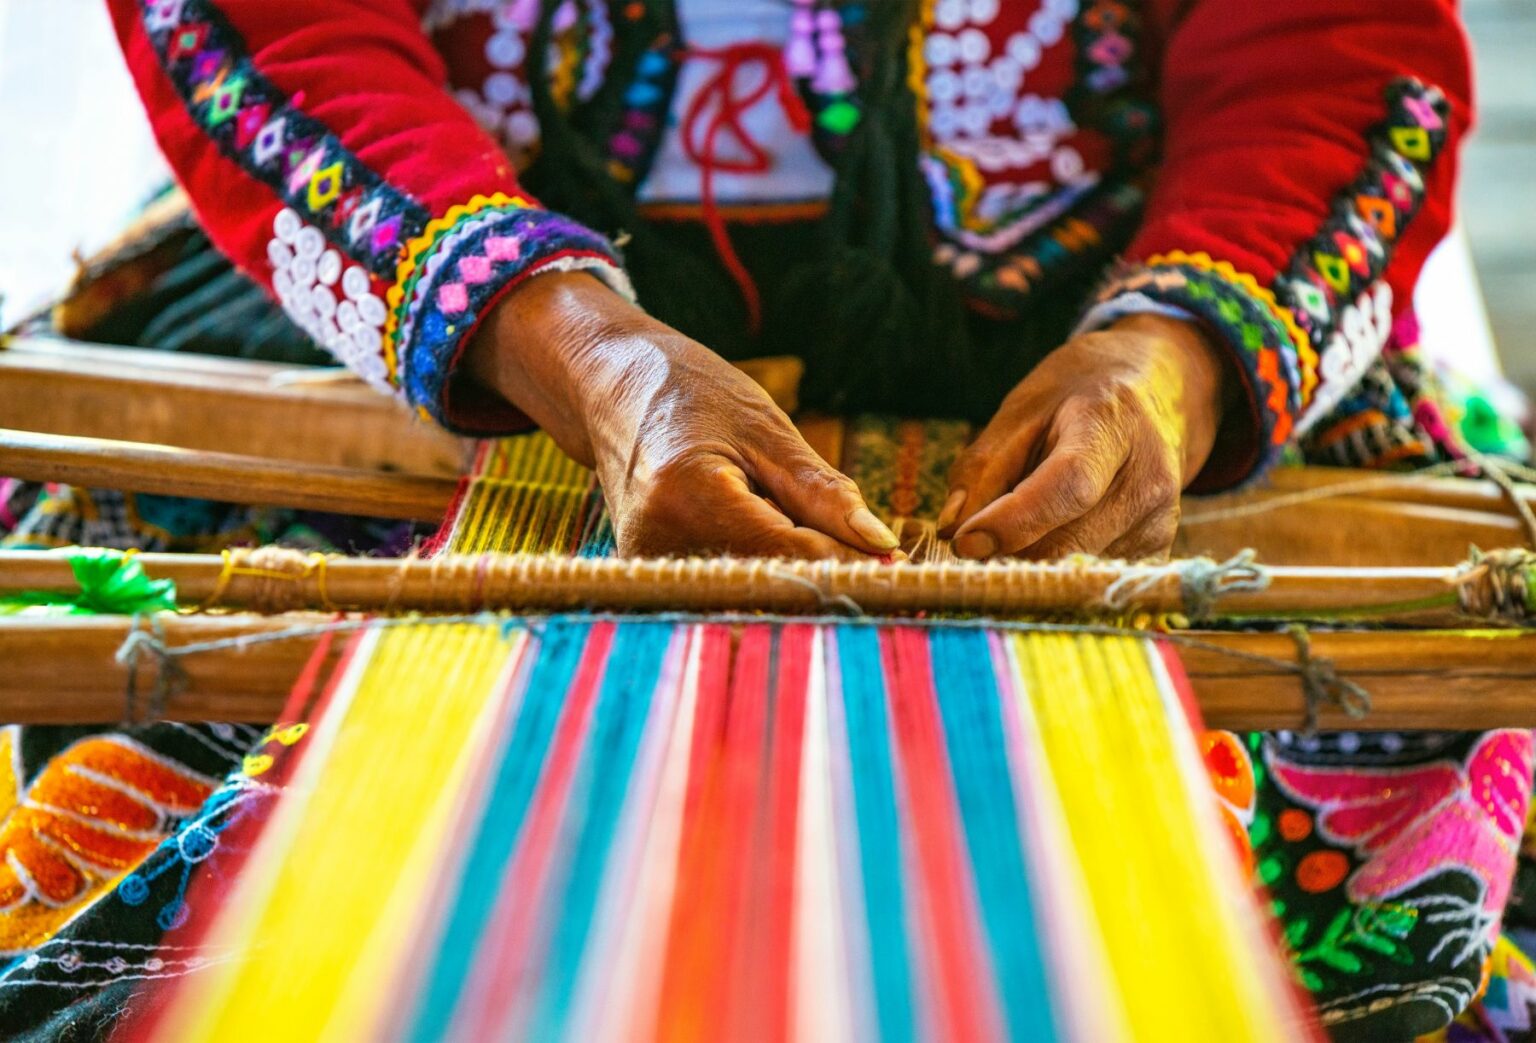 Hands of woman in bright clothing weaving colorful tapestry